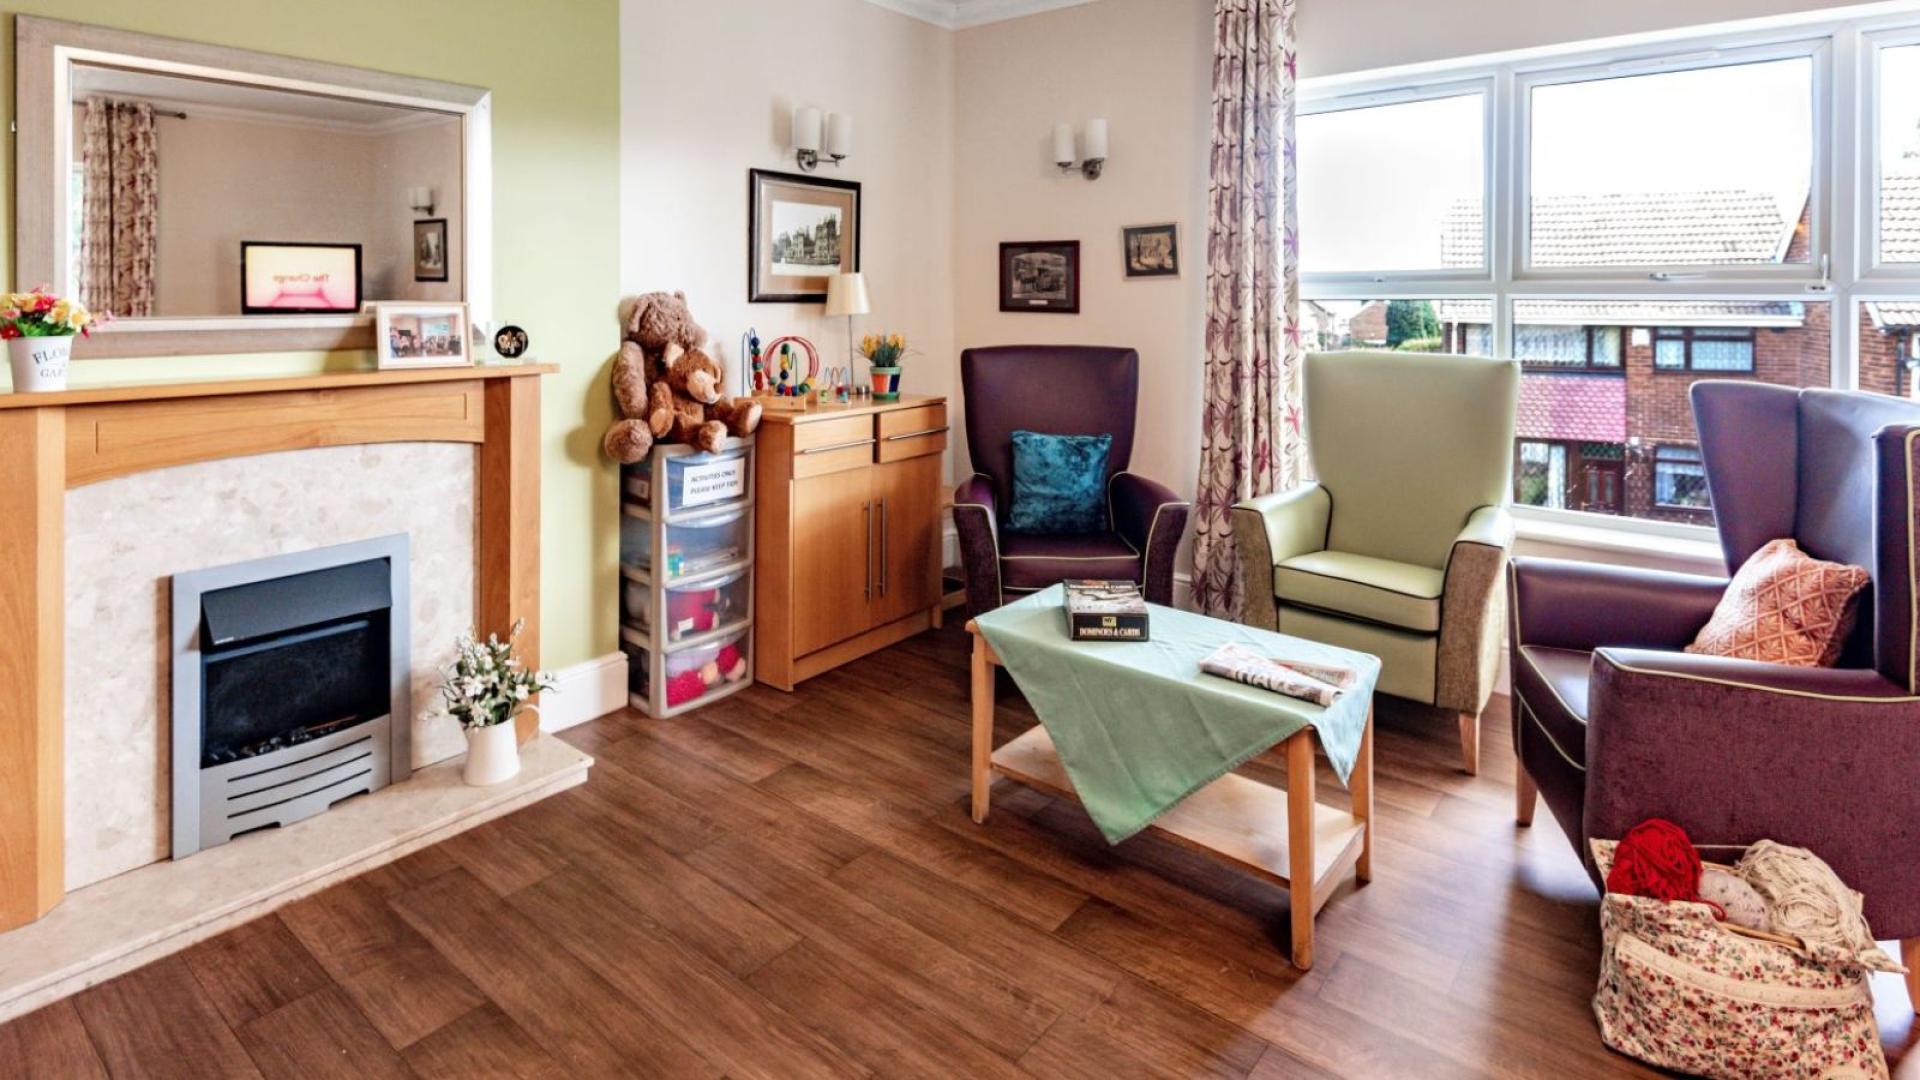 Living room with fireplace at Nesfield Lodge Dementia Care Home in Leeds